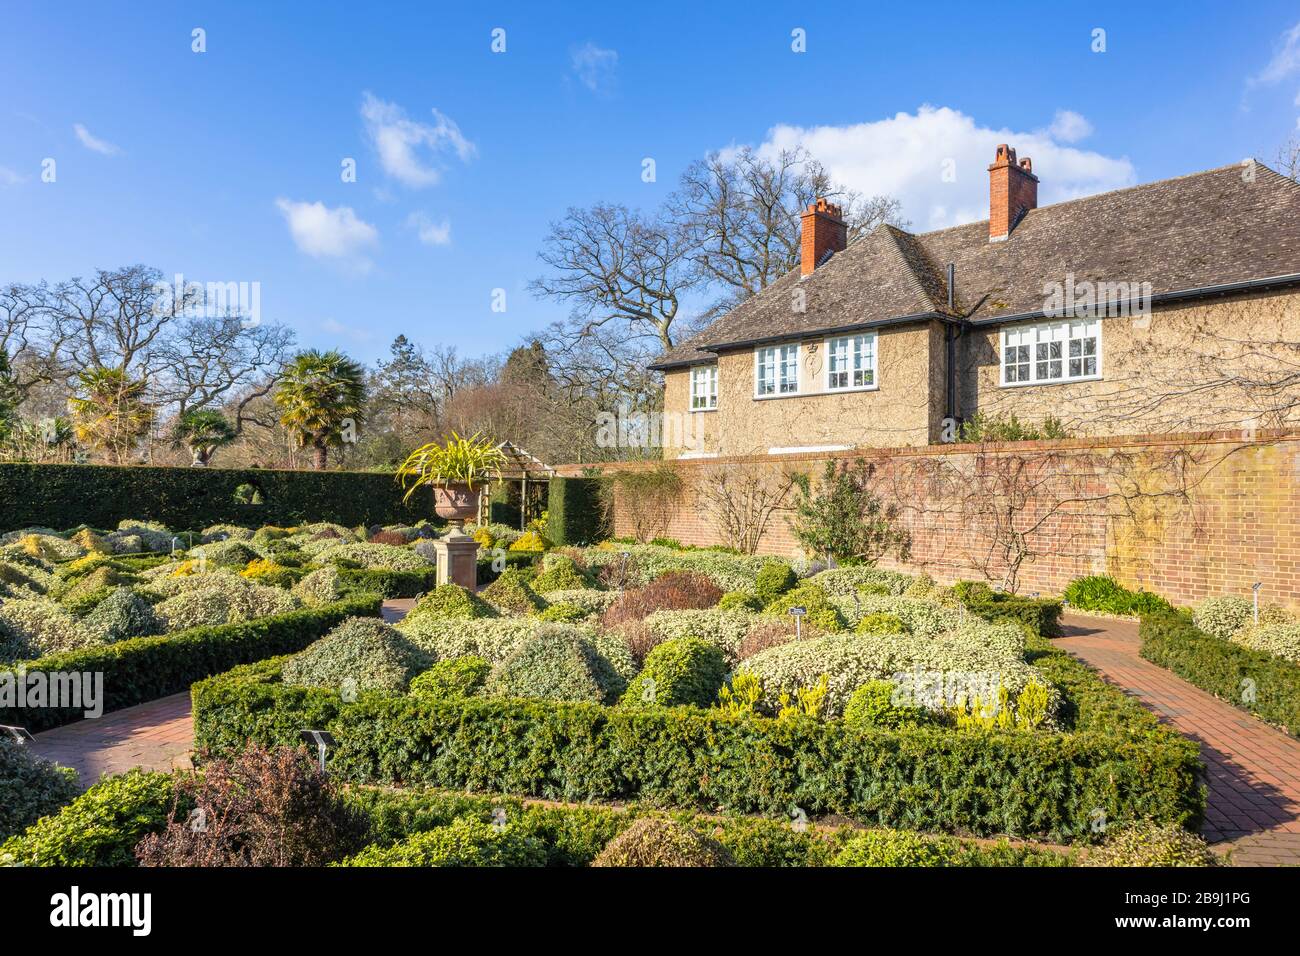 The formal Knot Garden, an enclosed walled garden with evergreen bushes including berberis, RHS Gardens, Wisley, Surrey, south-east England, in winter Stock Photo